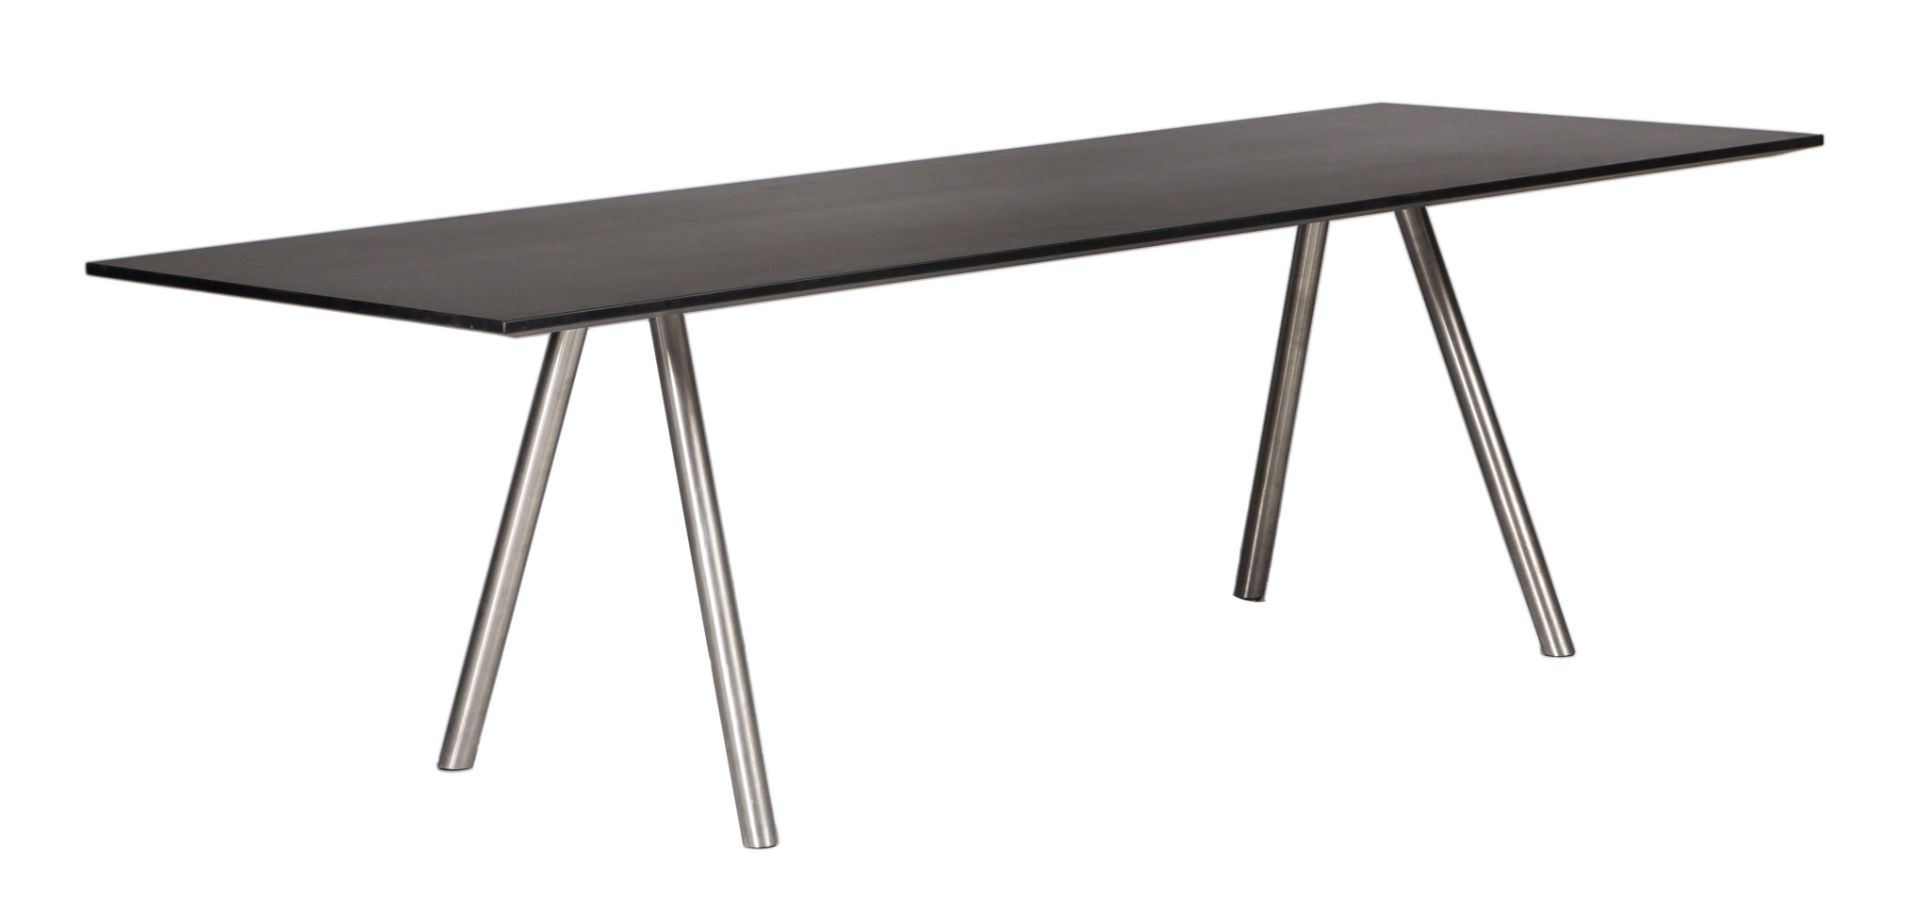 An A-Table by Maarten van Severen for Vitra, H 72,5 - W 240 - D 90 cm - Image 14 of 22